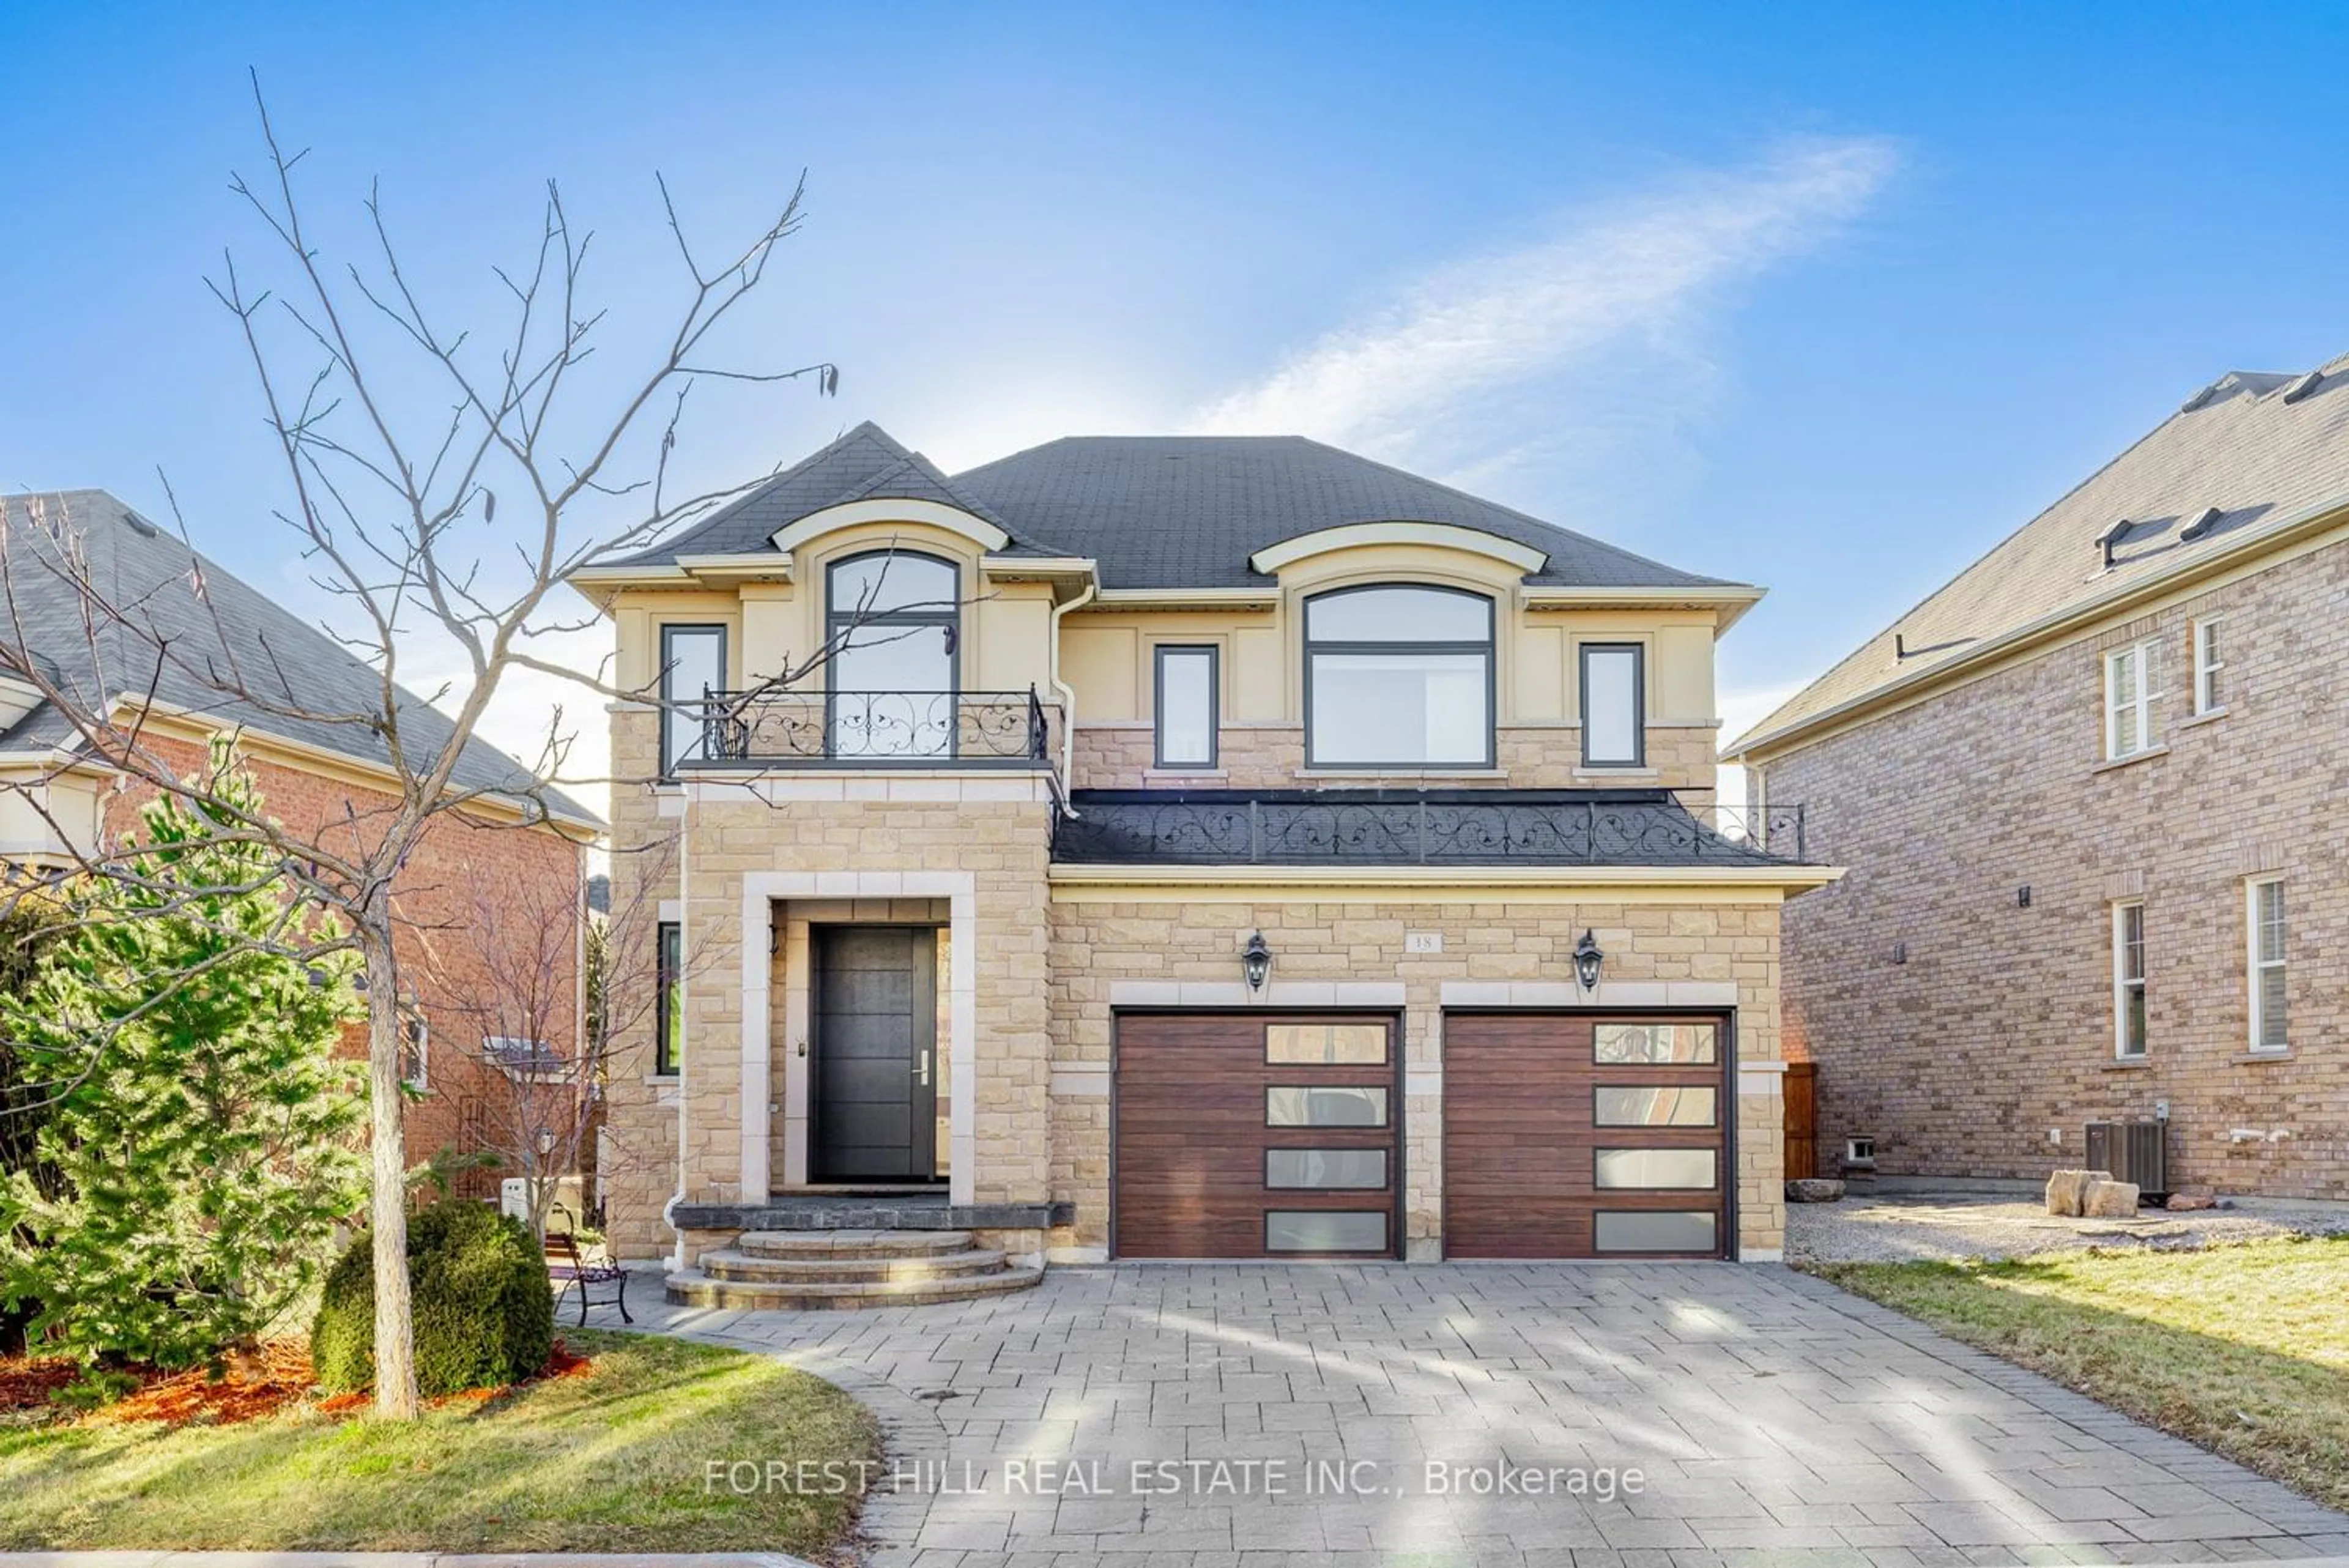 Home with brick exterior material for 18 William Bowes Blvd, Vaughan Ontario L6A 4B1